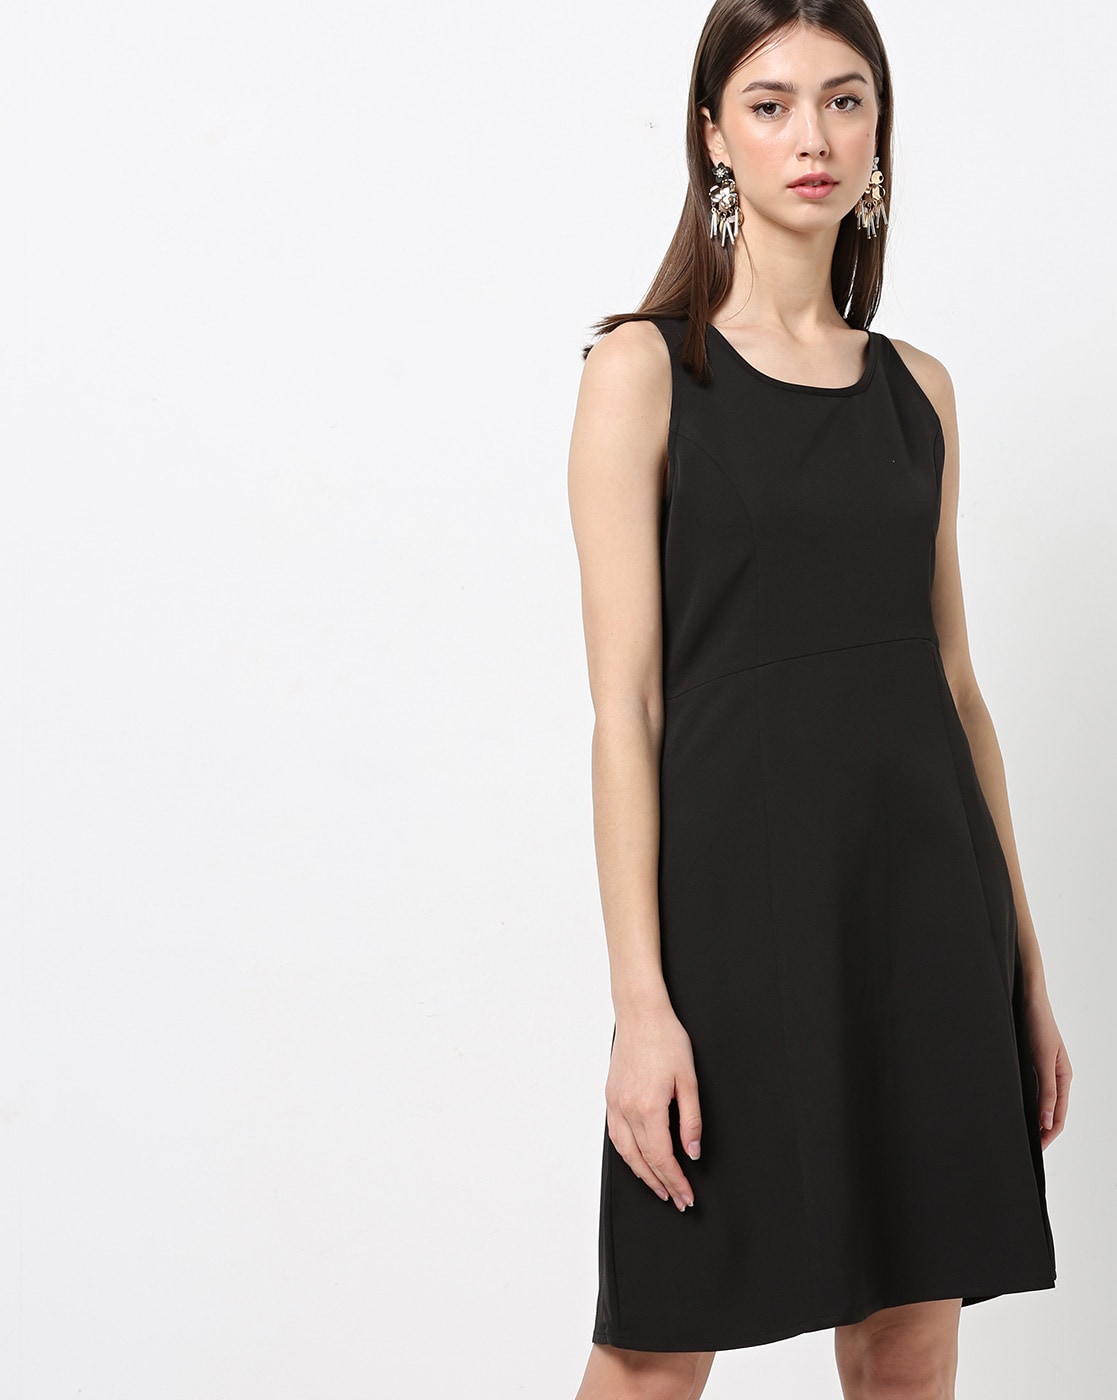 Ethnic Gowns | Black Sleeveless Gown | Freeup